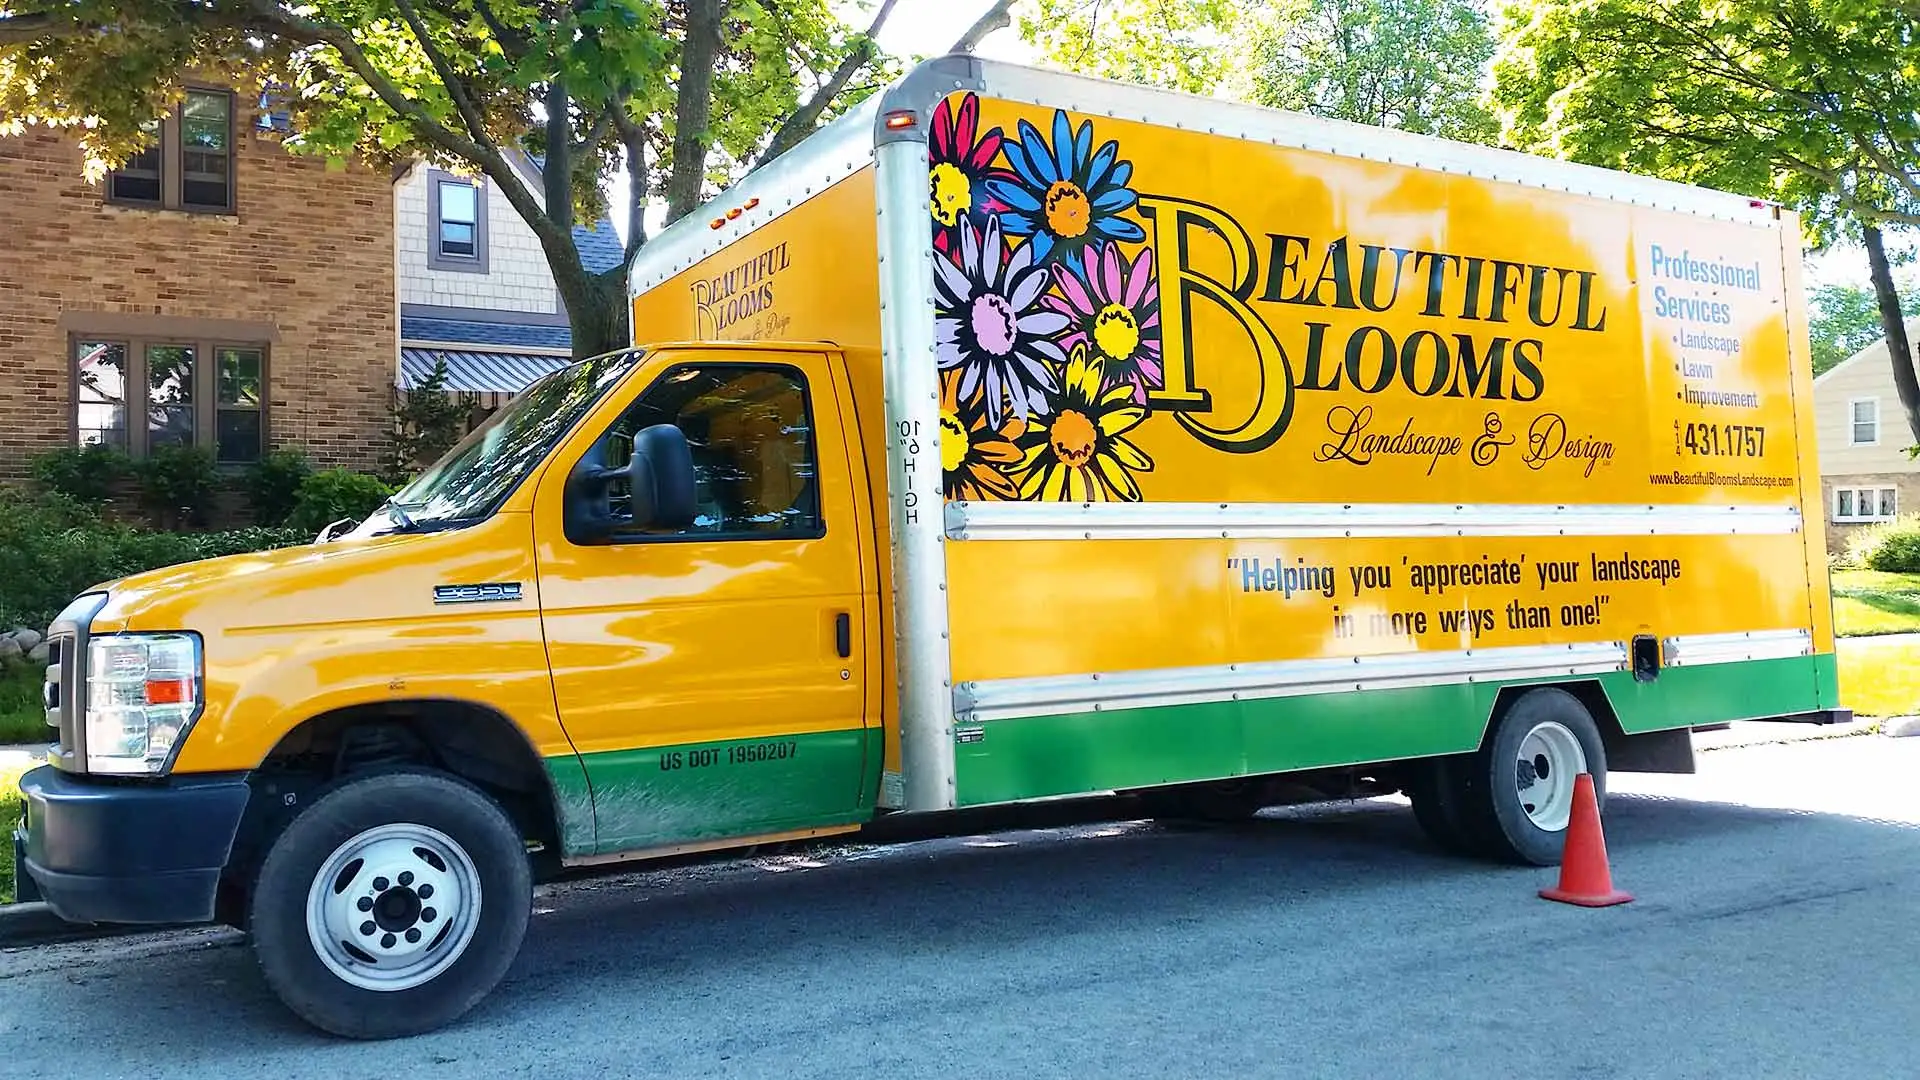 Beautiful Blooms, LLC has vehicles that are marked with the company's logo and colors when they arrive at our clients' homes.